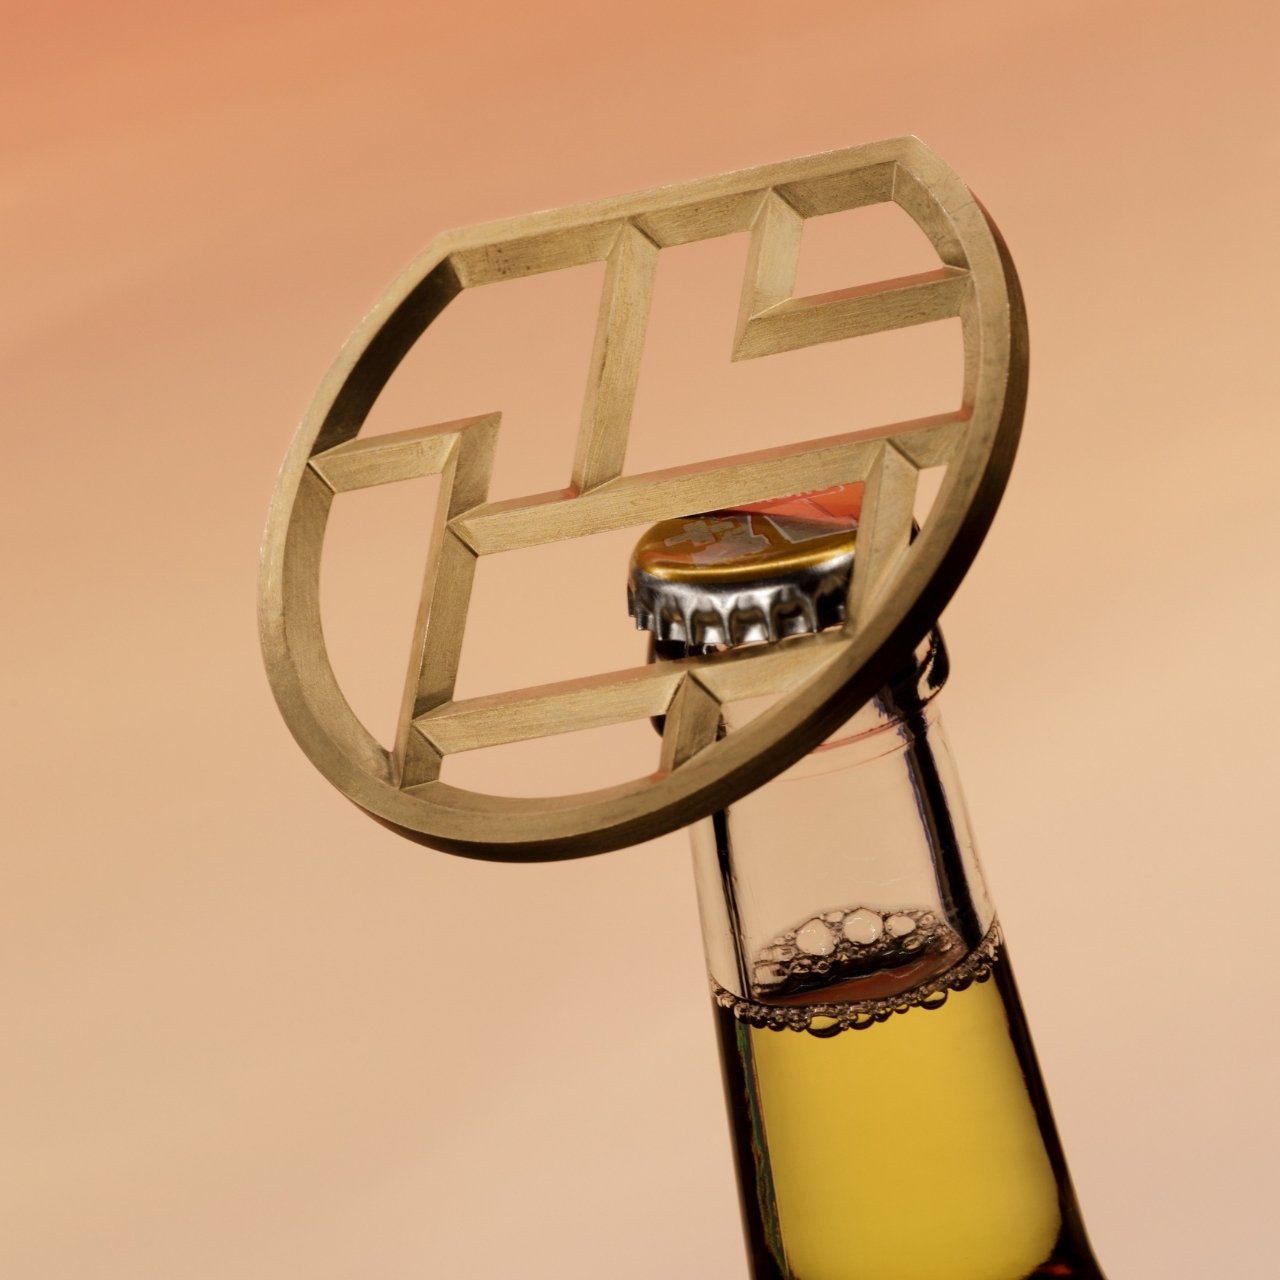 #Unique bottle opener concept is inspired by Chinese architecture